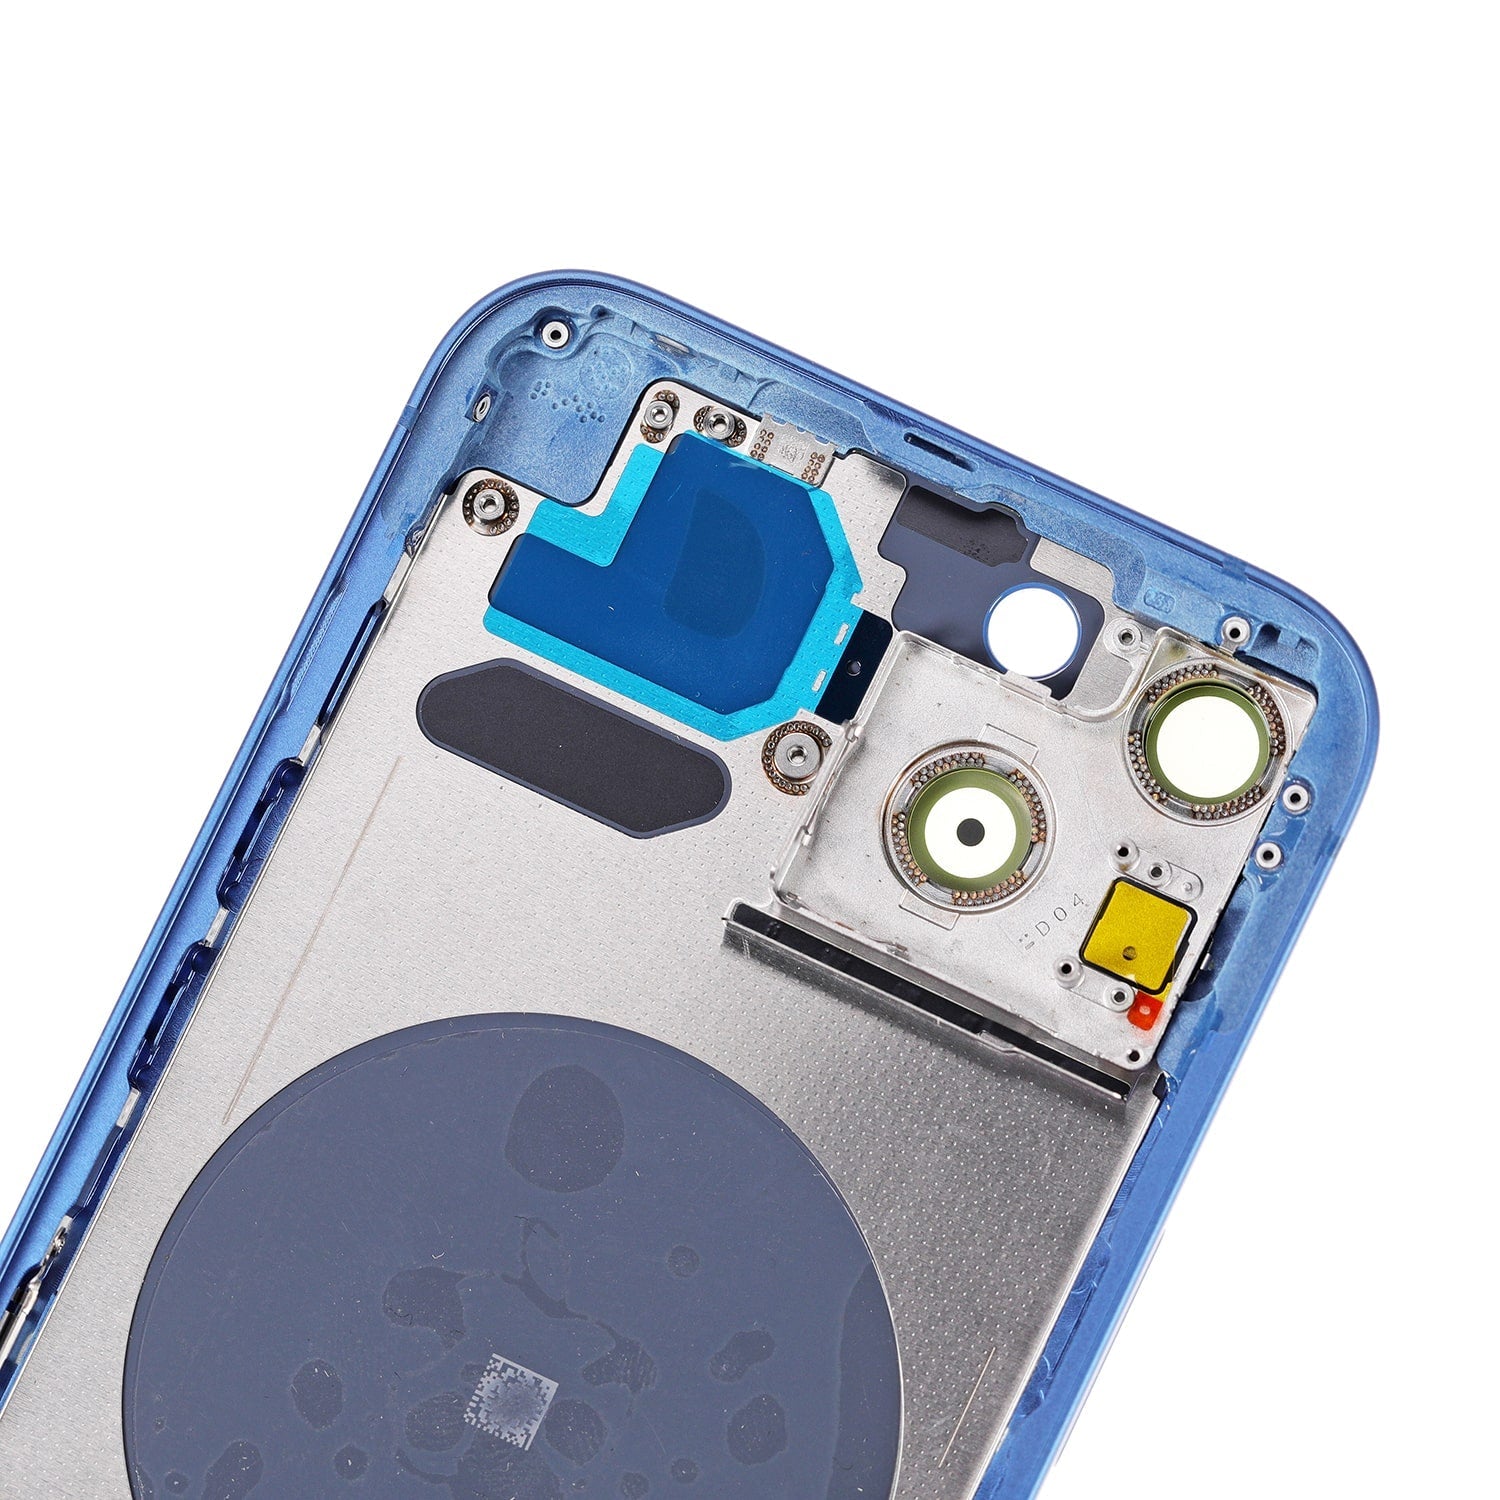 BLUE REAR HOUSING WITH FRAME FOR IPHONE 13